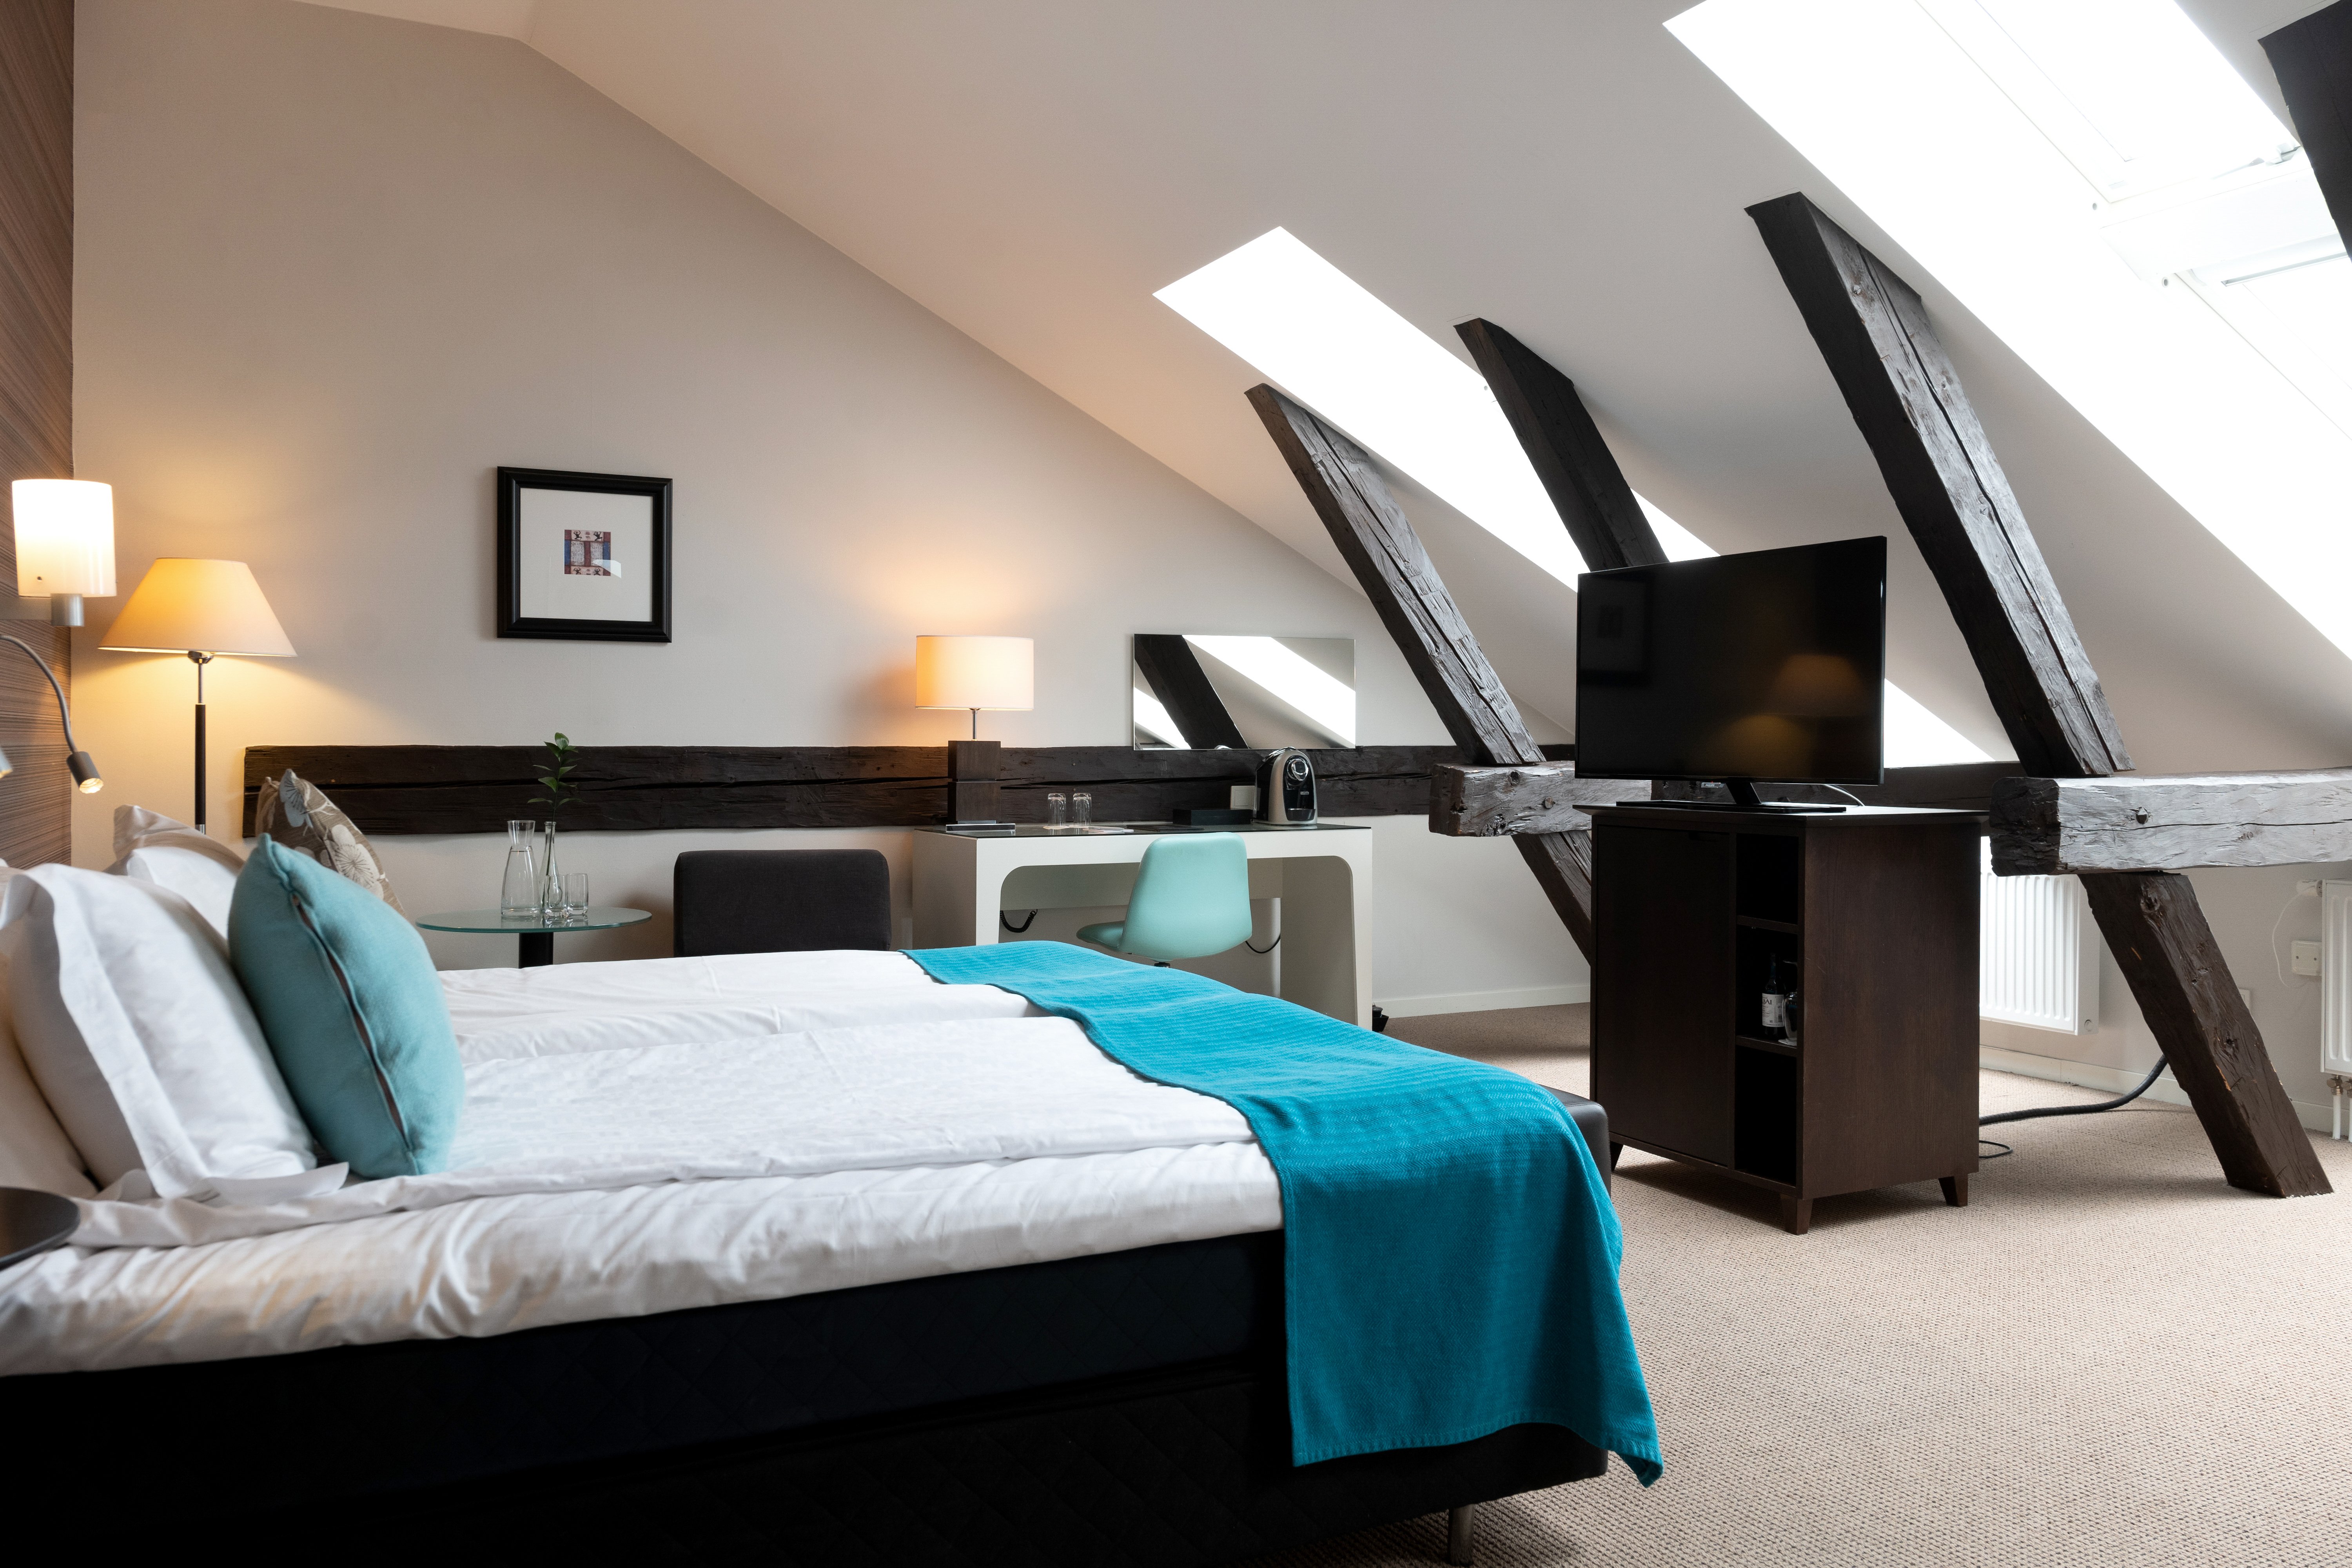 Hotel room with wooden beams, slanted ceiling, double bed and desk